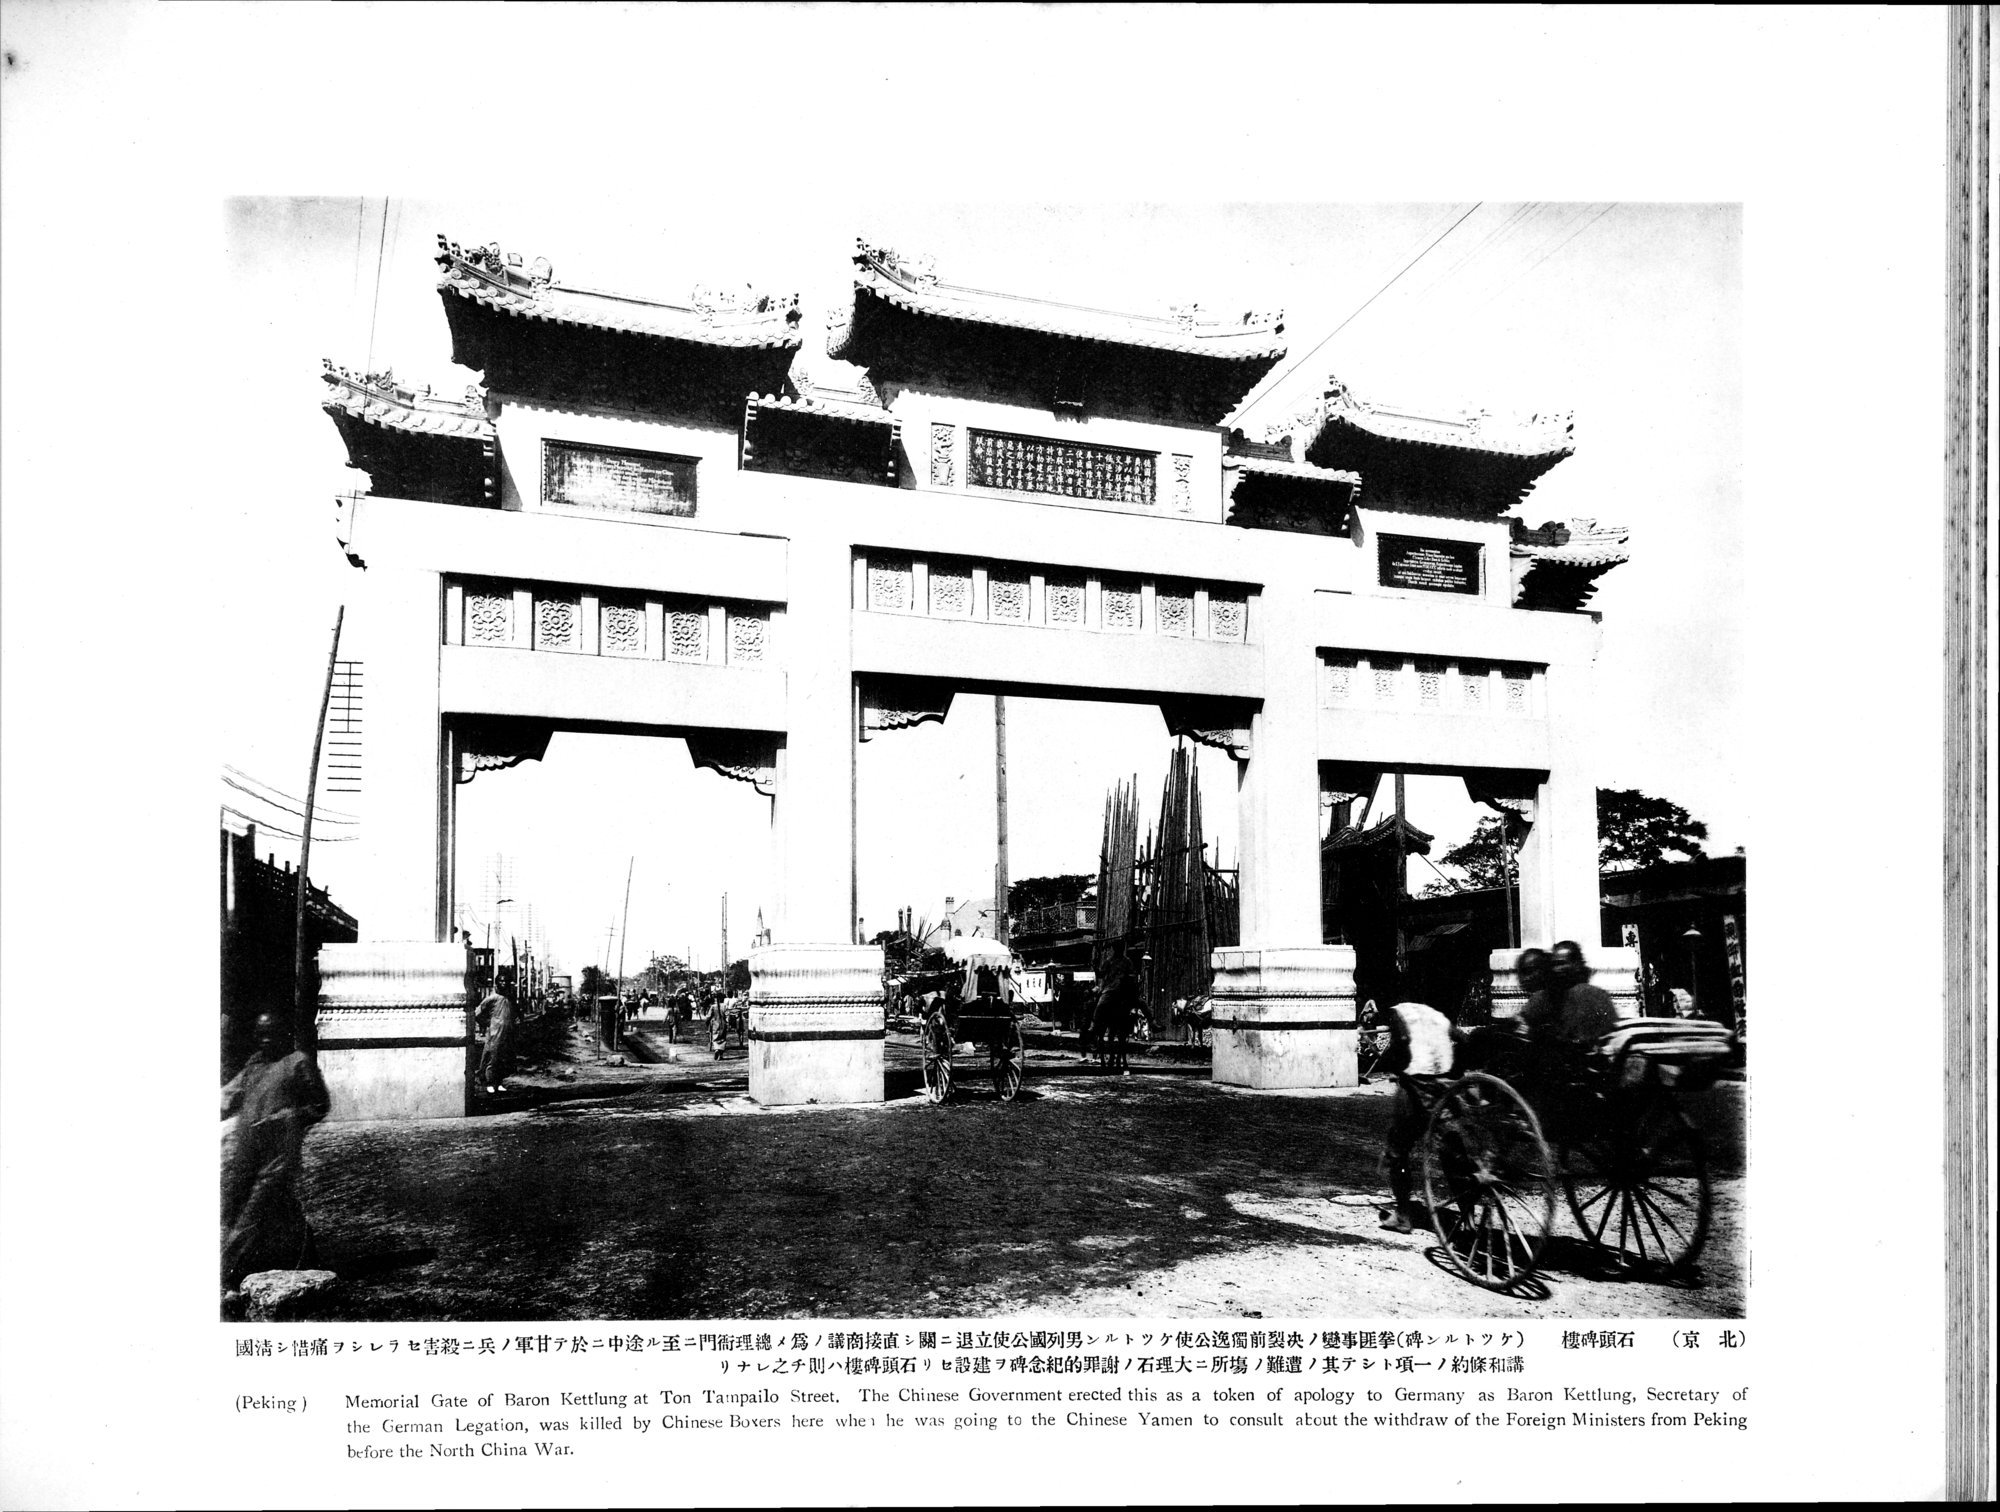 Views and Custom of North China : vol.1 / Page 143 (Grayscale High Resolution Image)